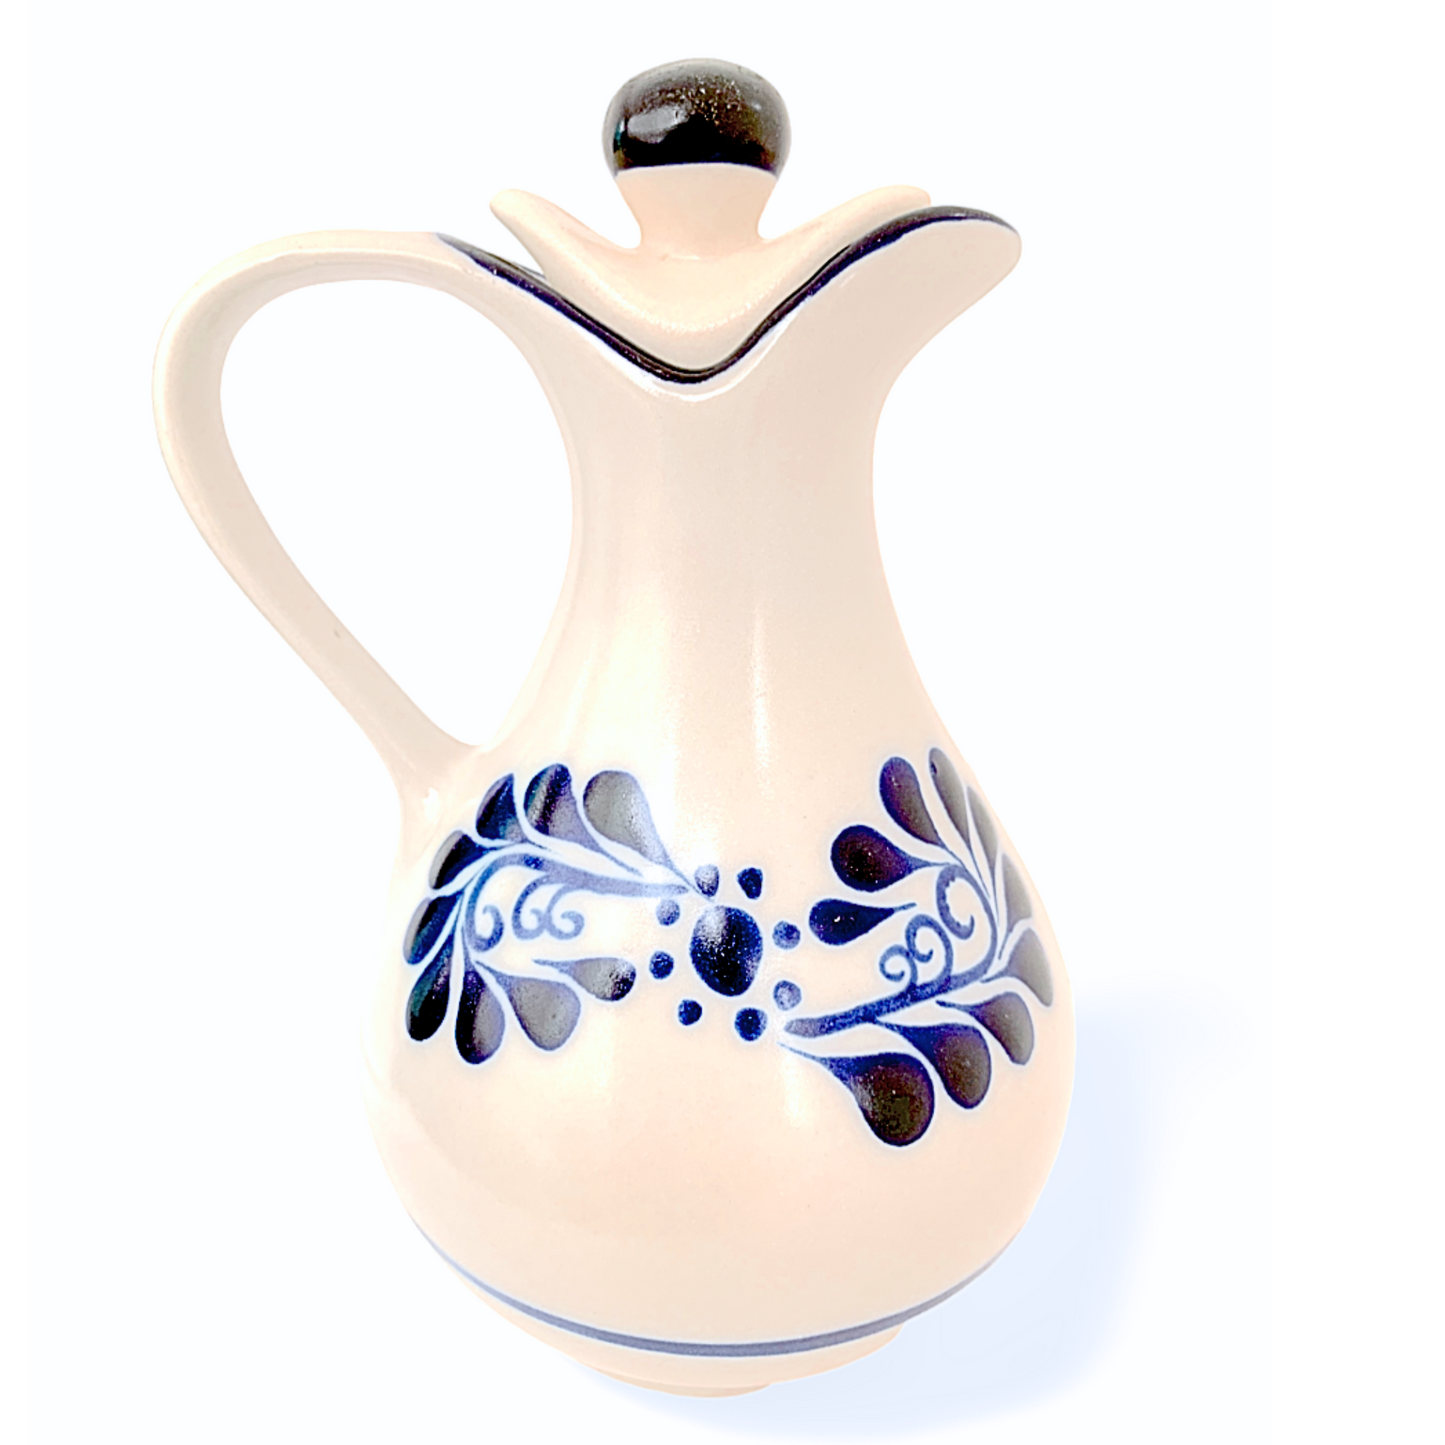 Hand-painted Mexican Talavera Ceramic Olive Oil Dispenser, premium quality, versatile for oils and beverages, crafted by top Mexican artisans.